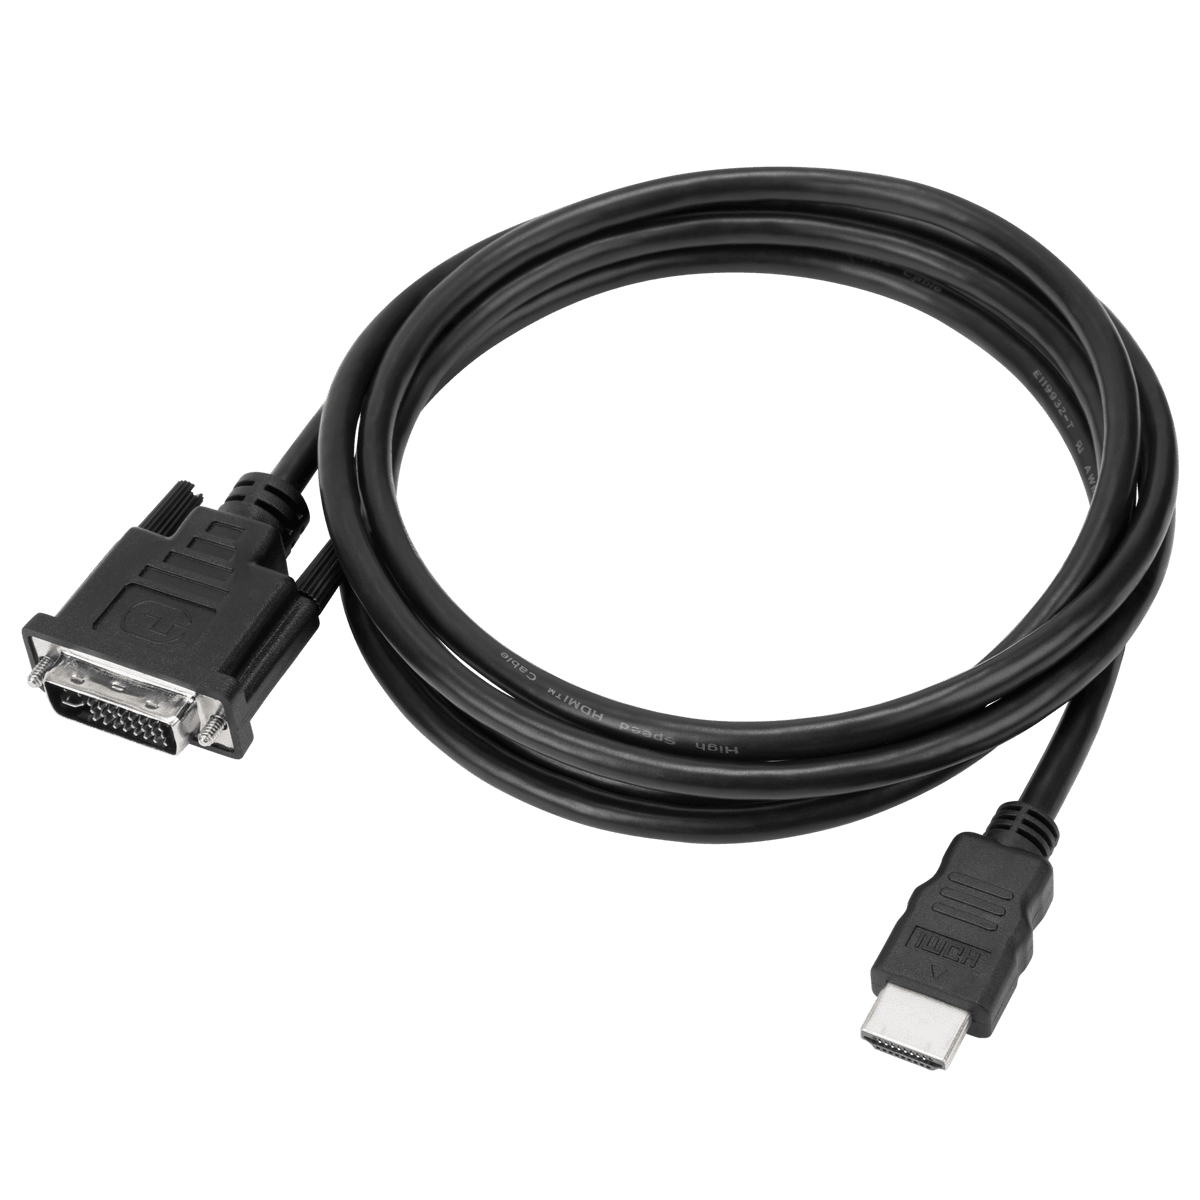 HDMI (M) to DVI-D (F) Adapter - ACX121USX, Cables & Adapters